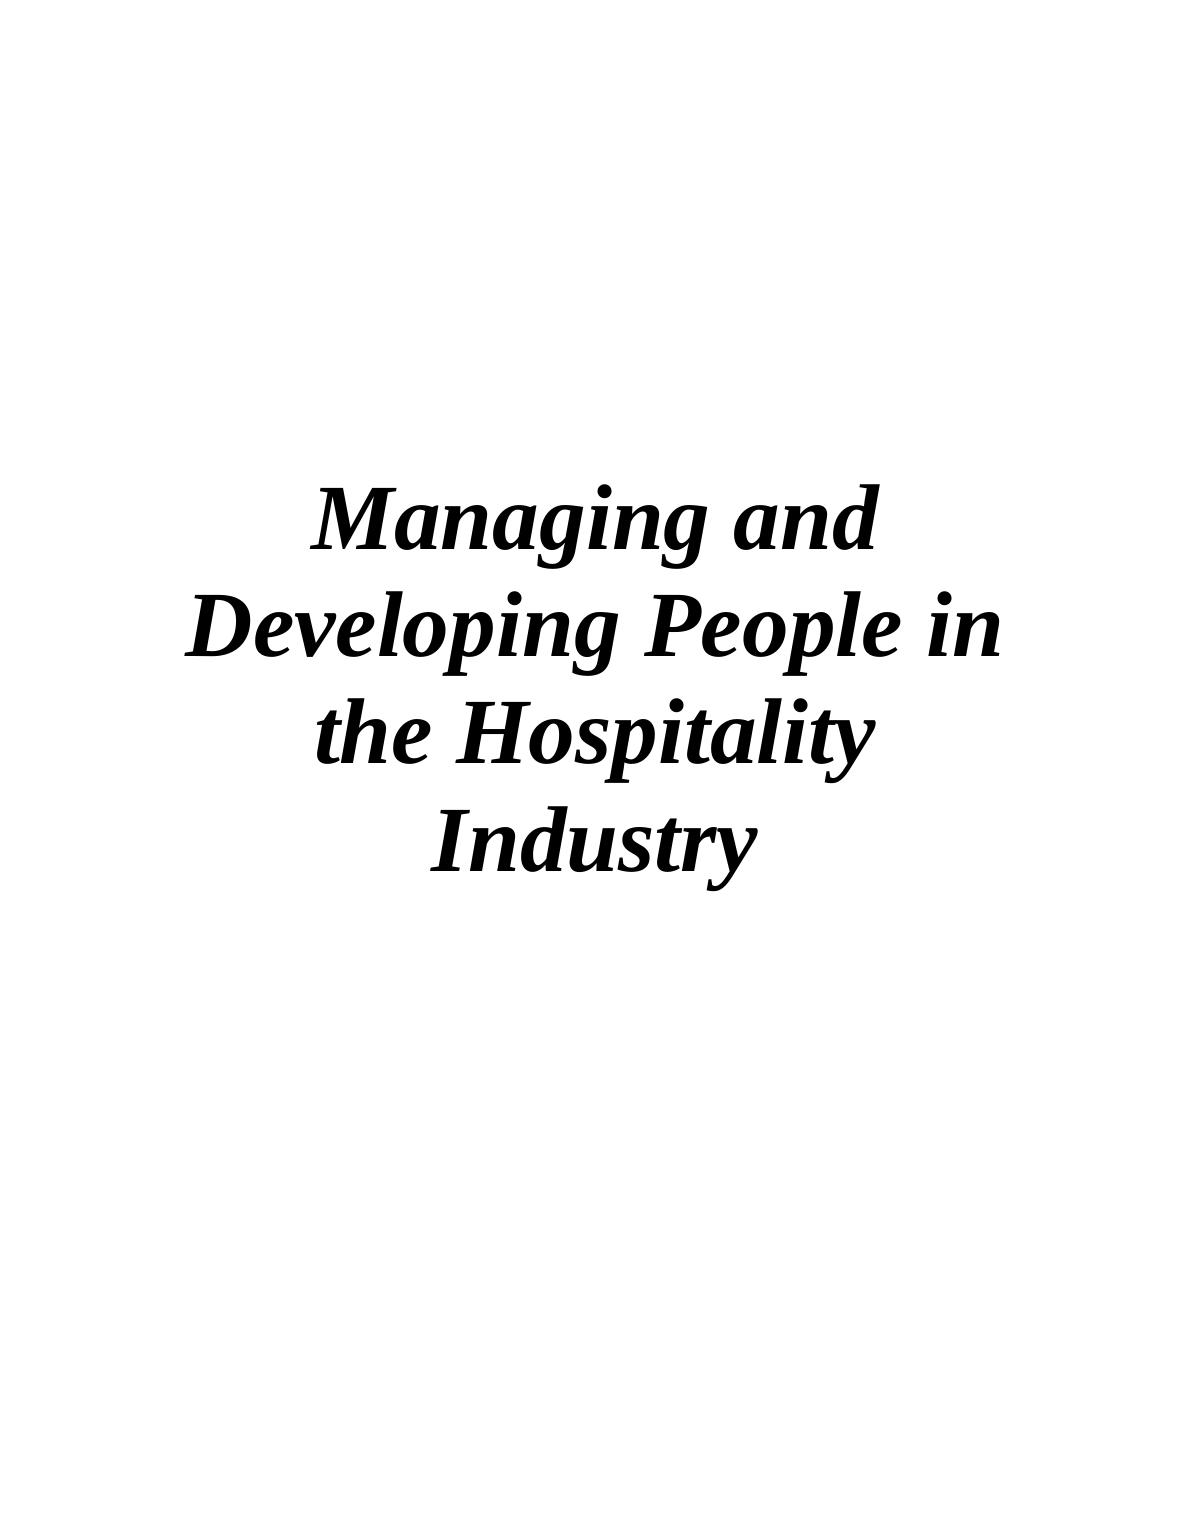 Managing and Developing People in the Hospitality Industry_1